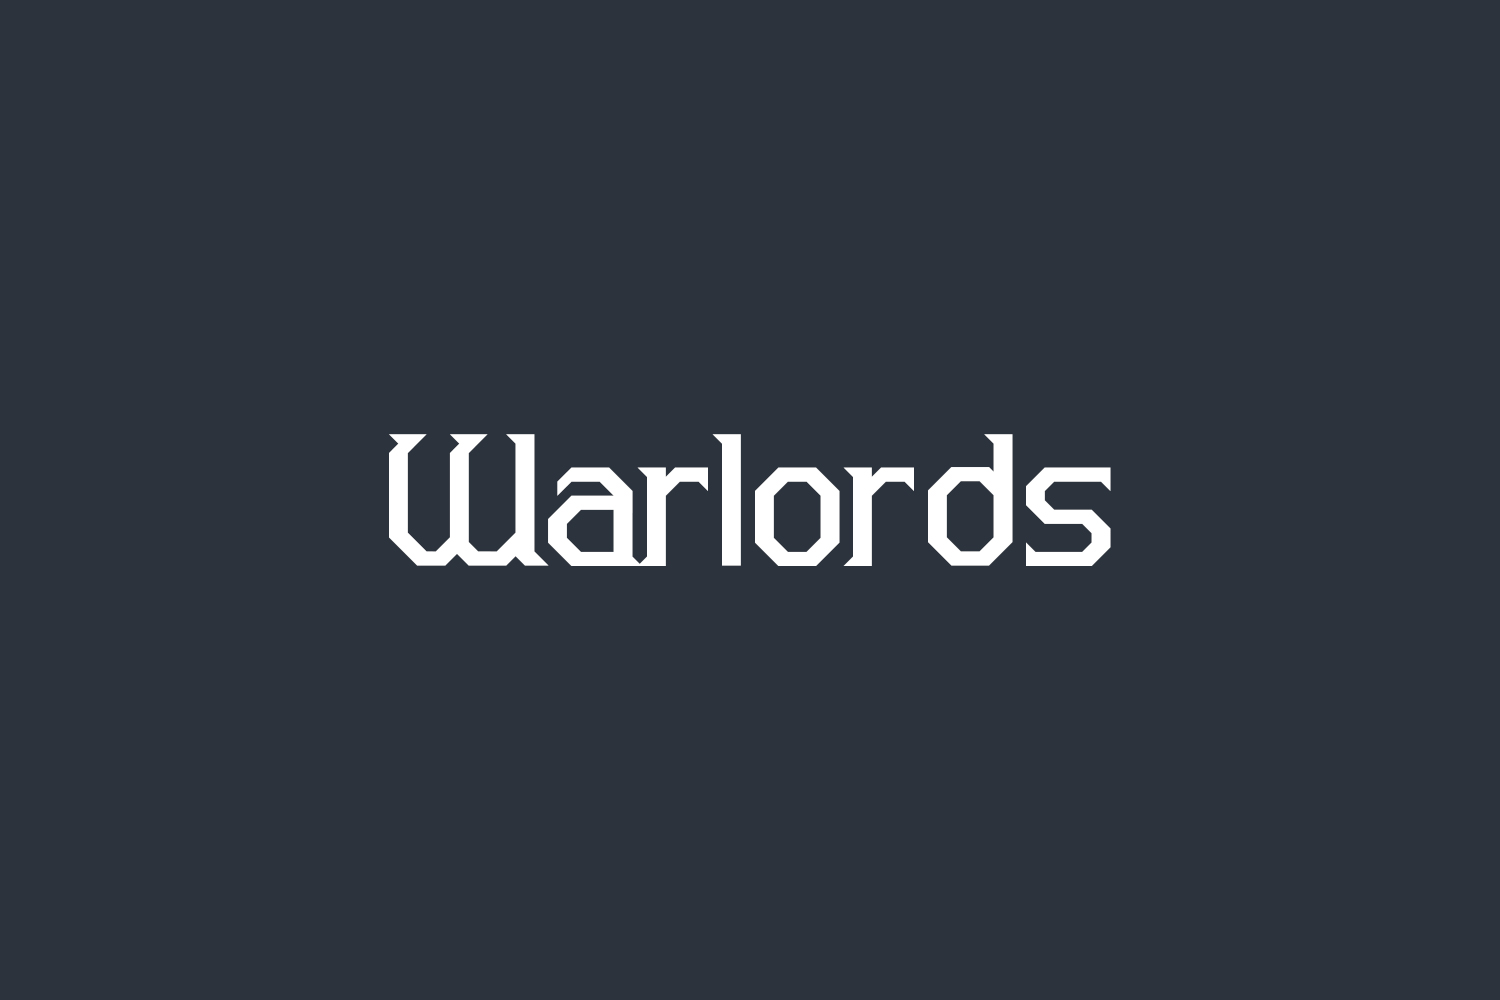 Warlords Free Font